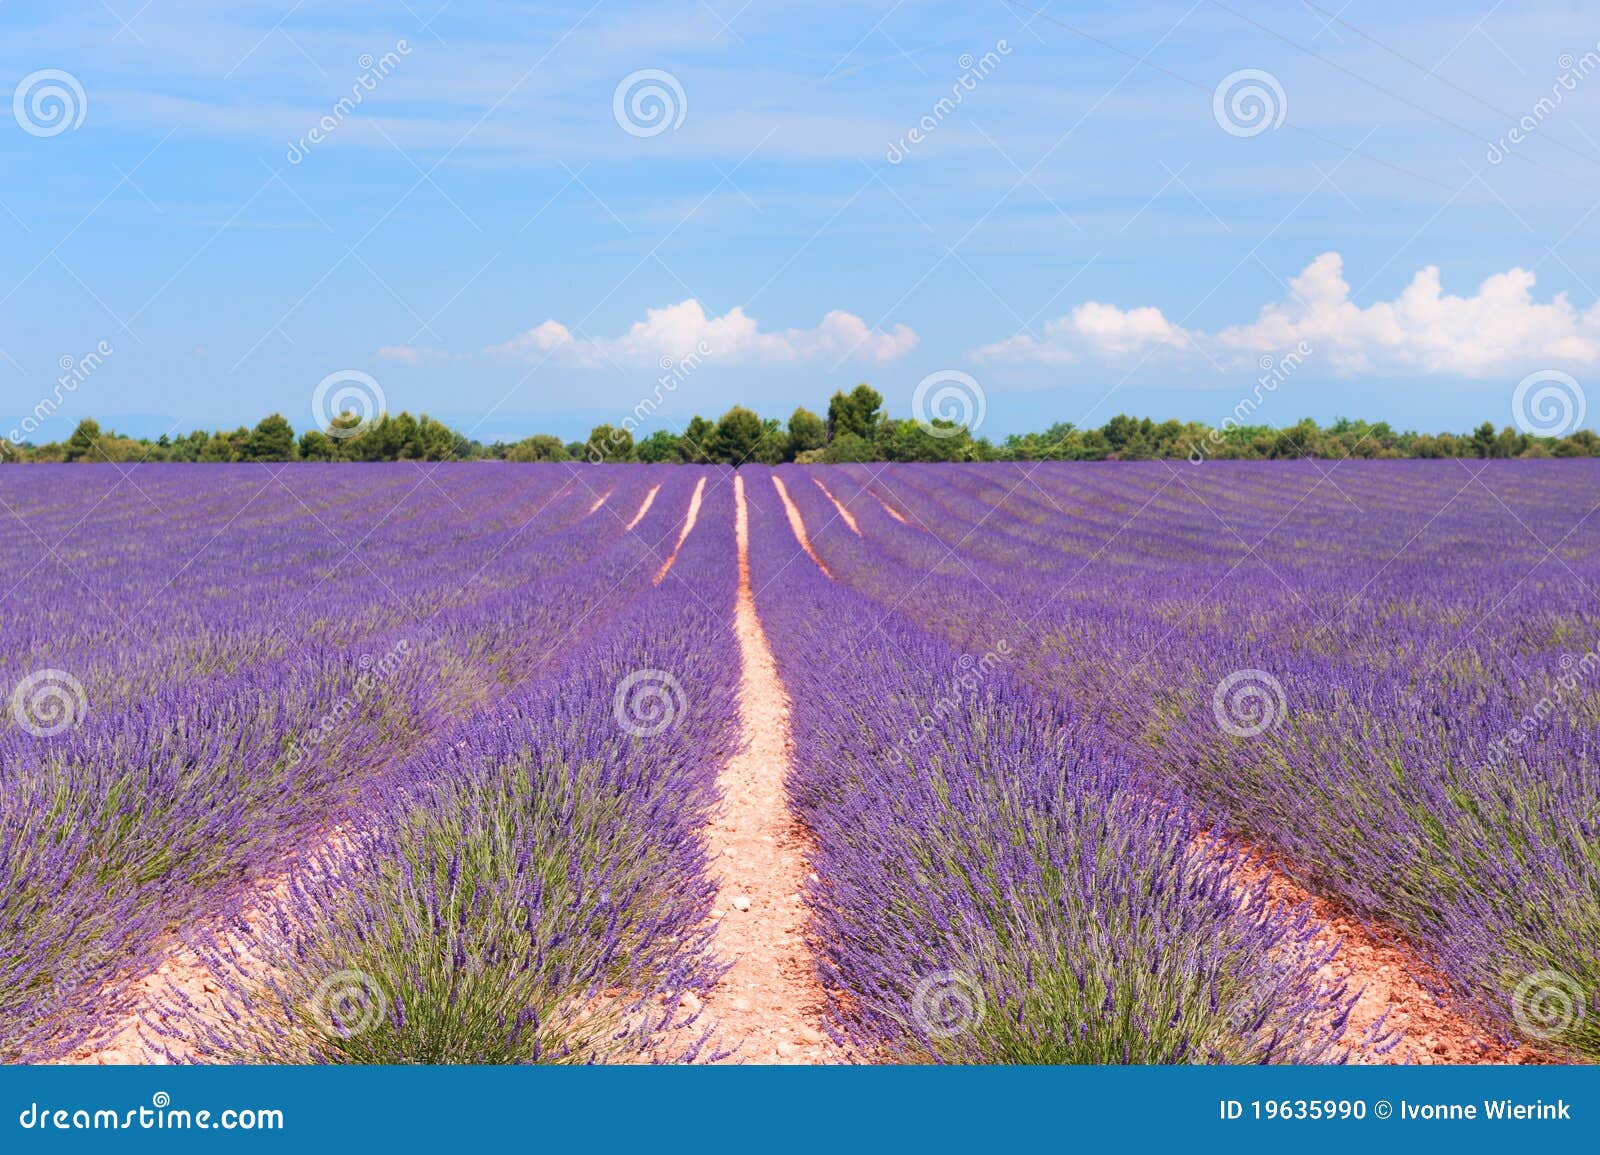 Lavender fields stock photo. Image of nature, valensole - 19635990